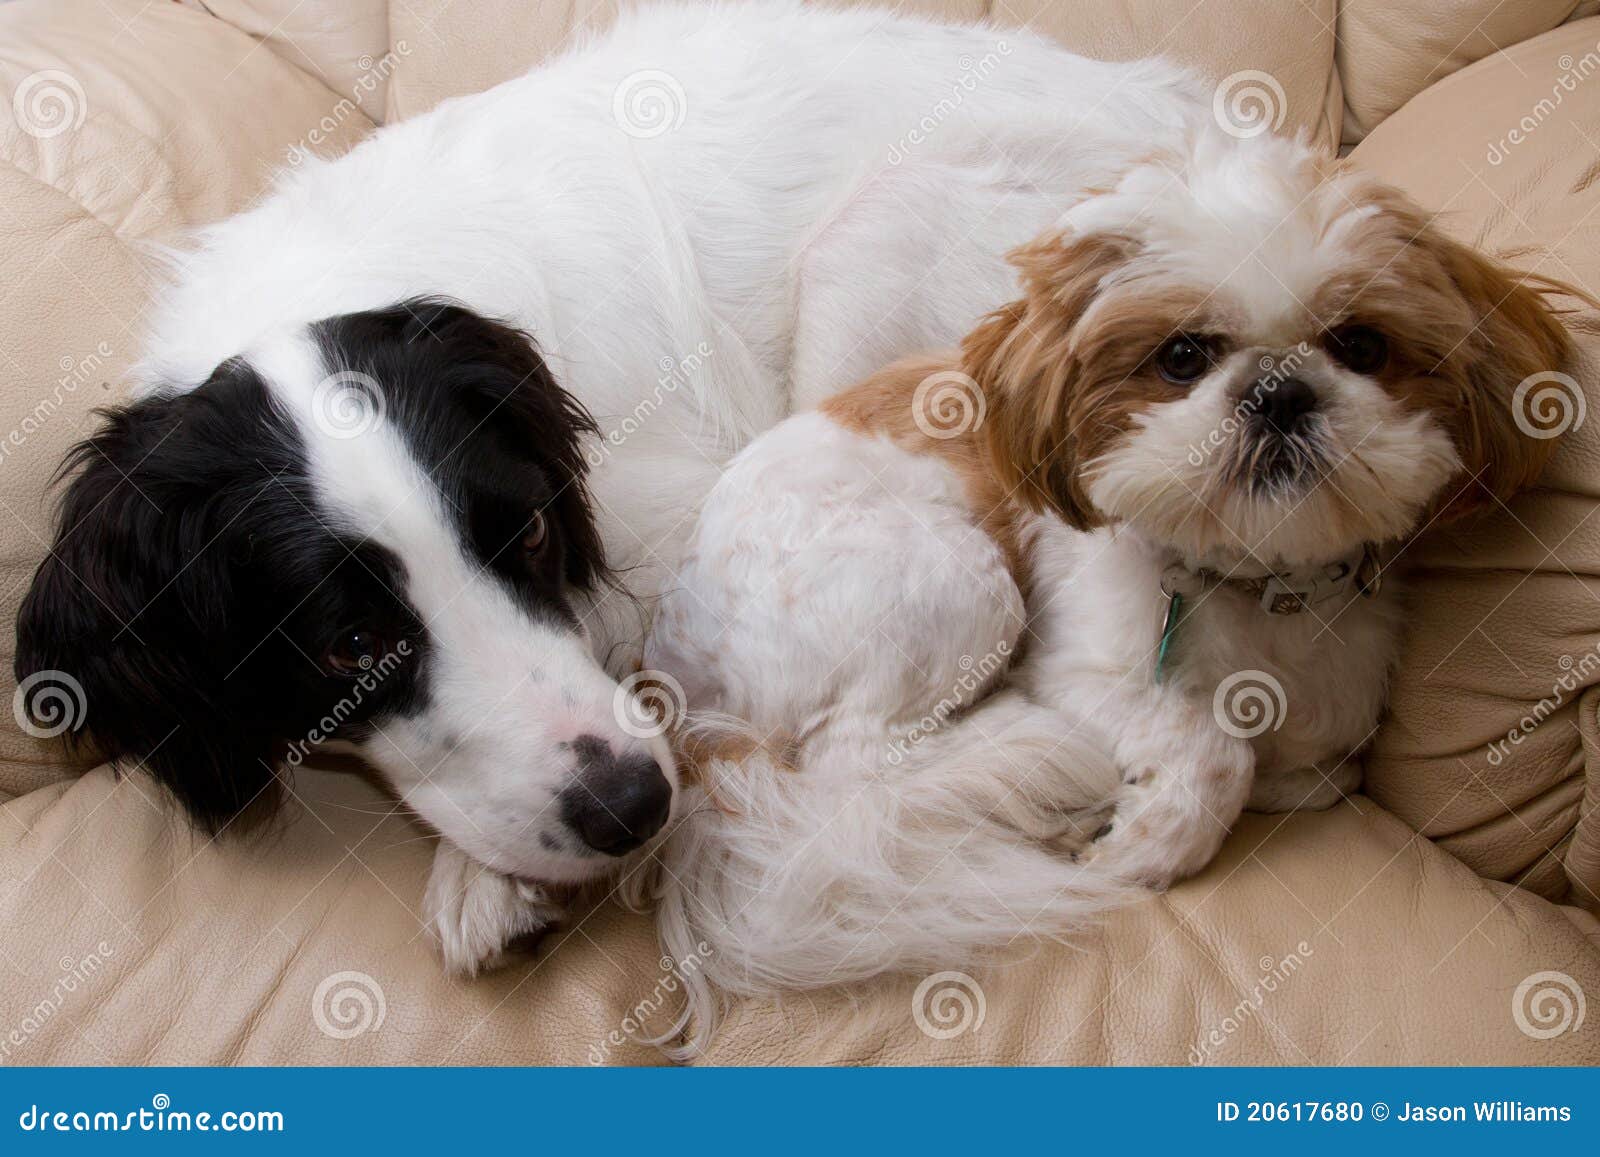 dogs on a comfy chair